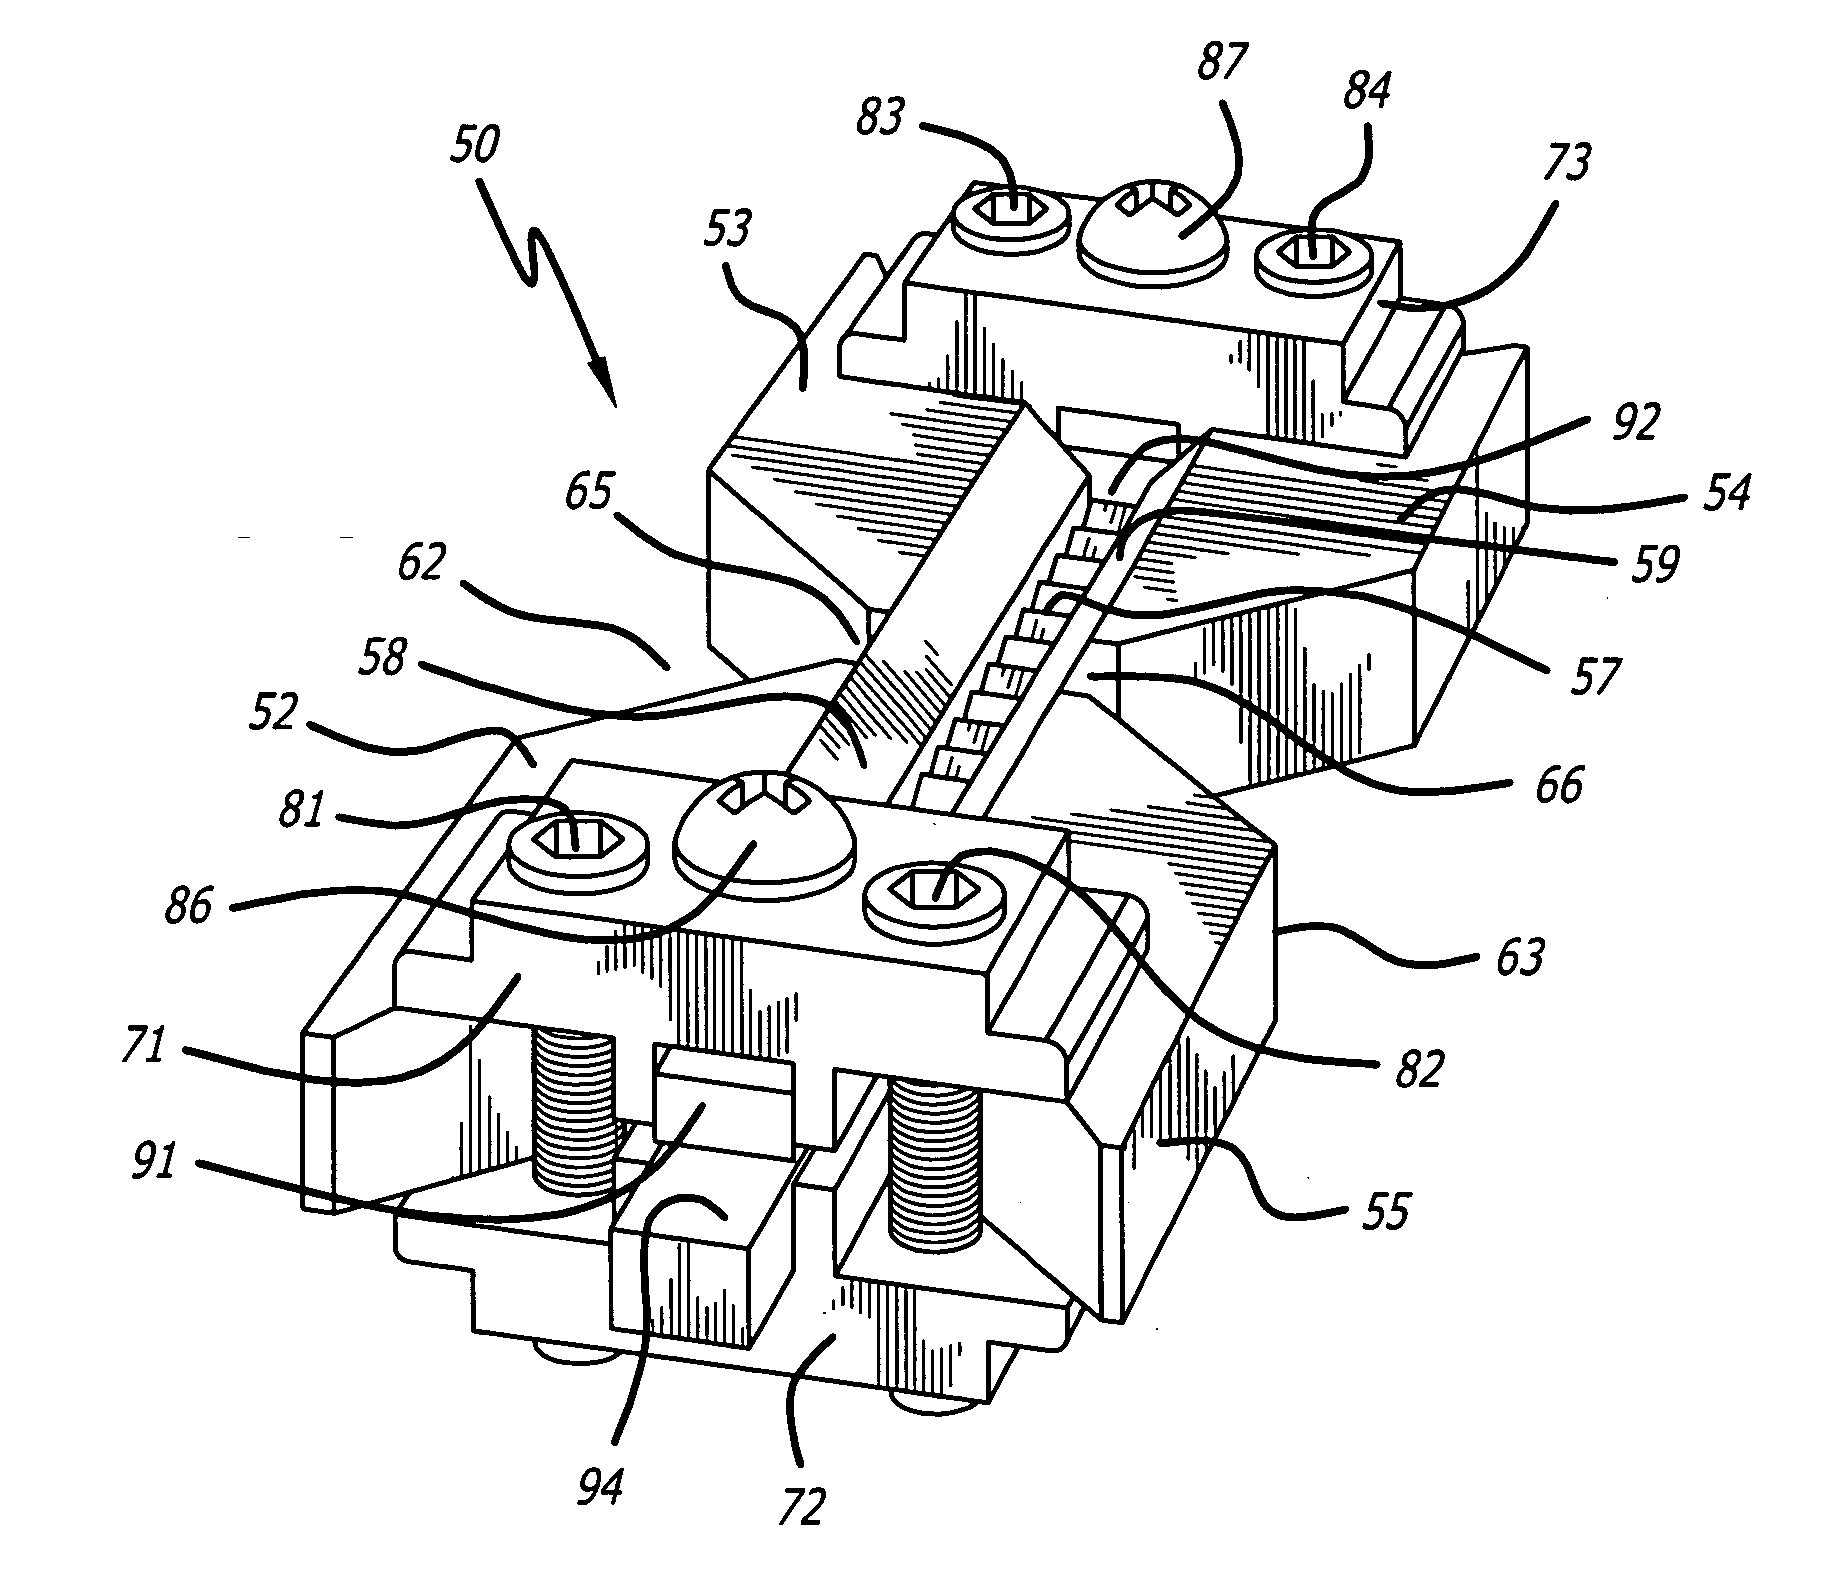 Ribbon microphone incorporating a special-purpose transformer and/or other transducer-output circuitry